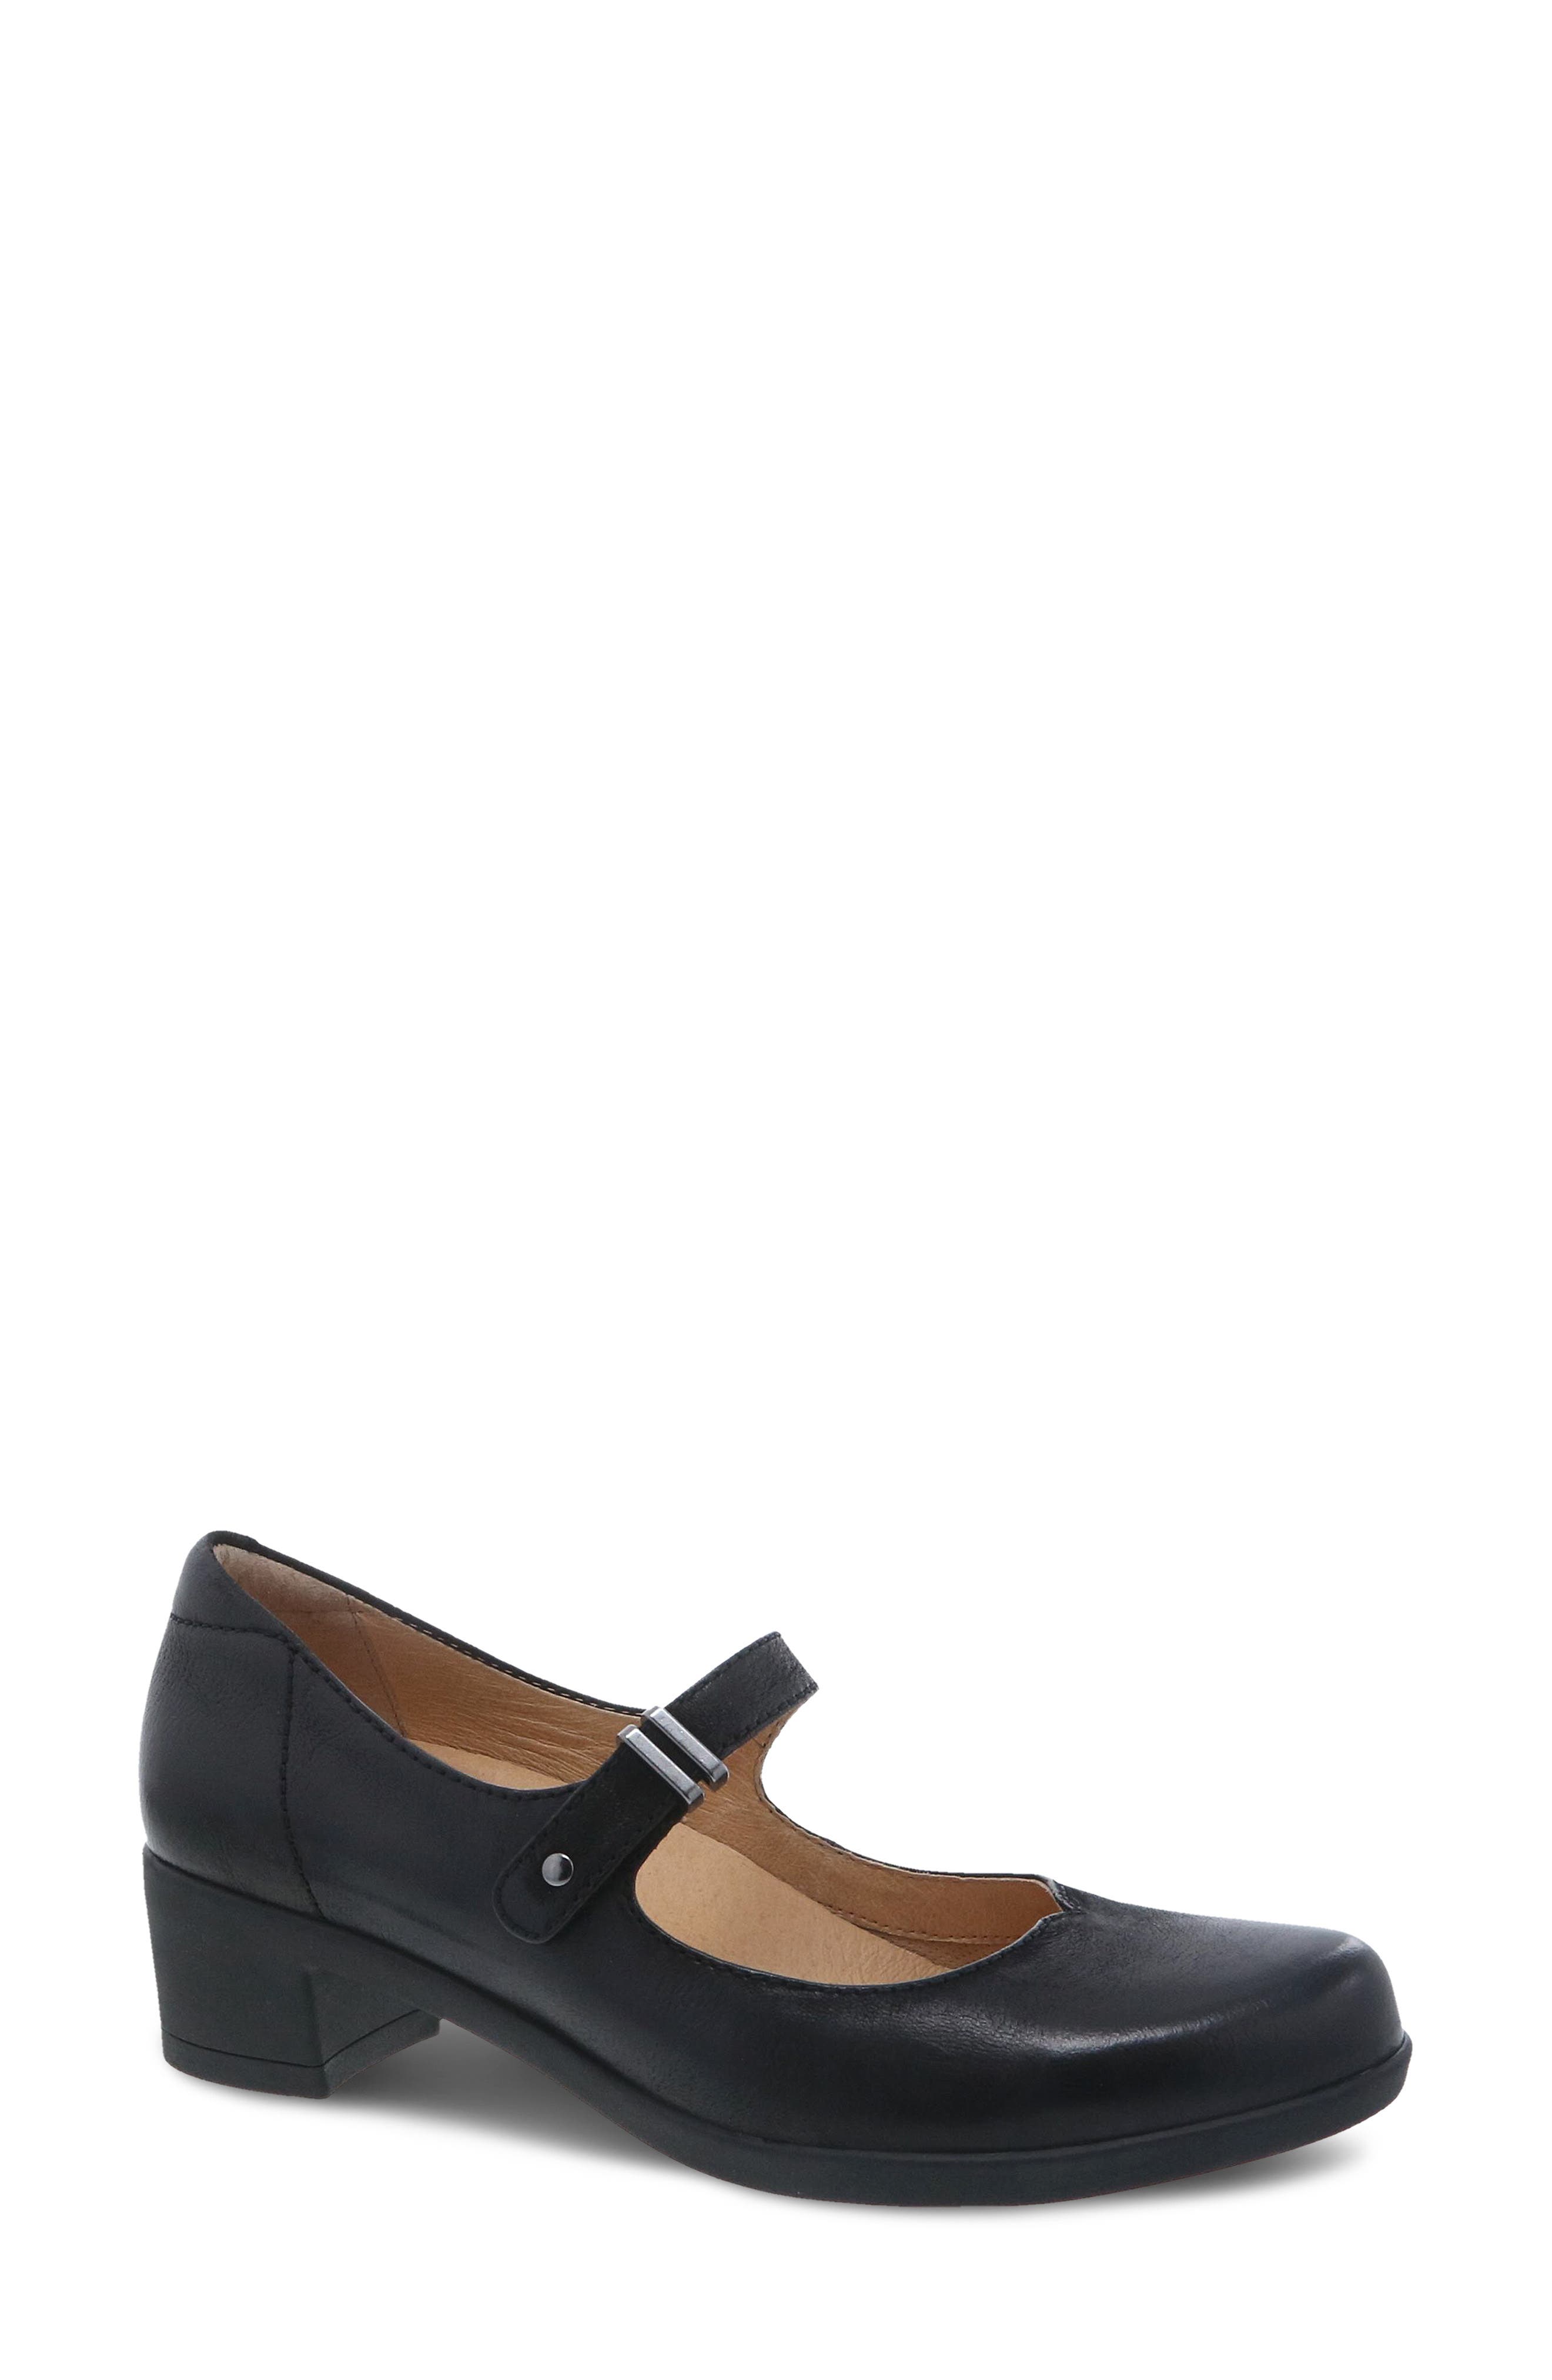 patent black mary jane shoes